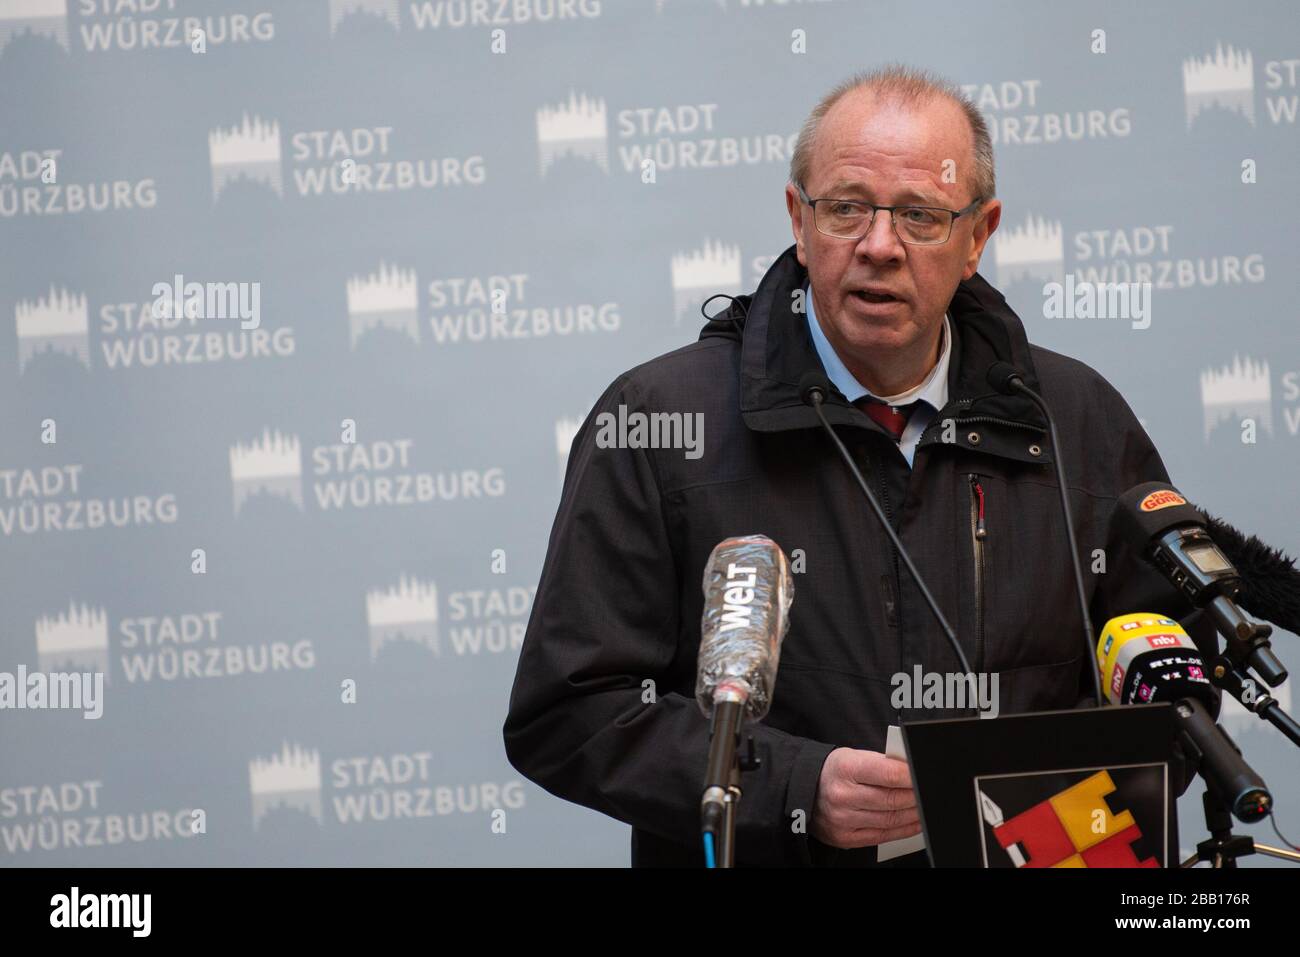 30 March 2020, Bavaria, Würzburg: The head of the public health department, Johann Löw, speaks at the press conference on the current situation of the city and district of Würzburg regarding the spread of the coronavirus. Photo: Nicolas Armer/dpa Stock Photo